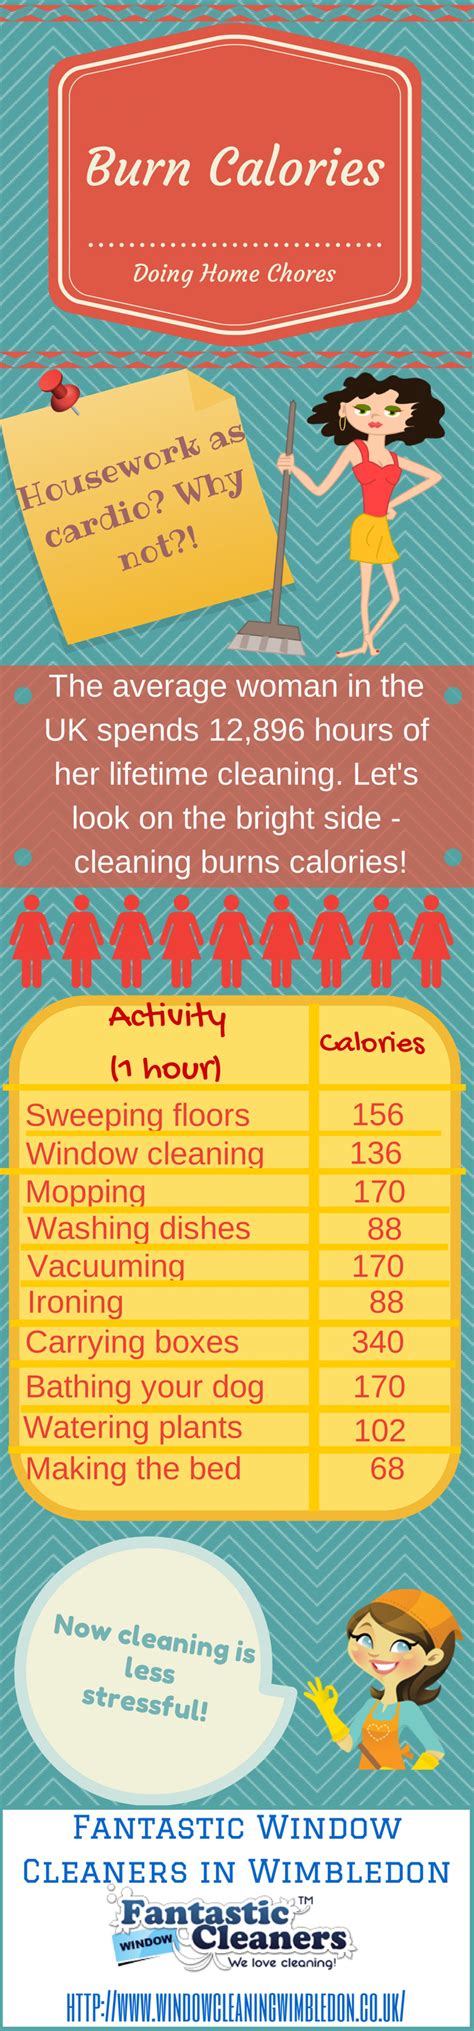 burn calories doing home chores infographic healthy mind healthy happy